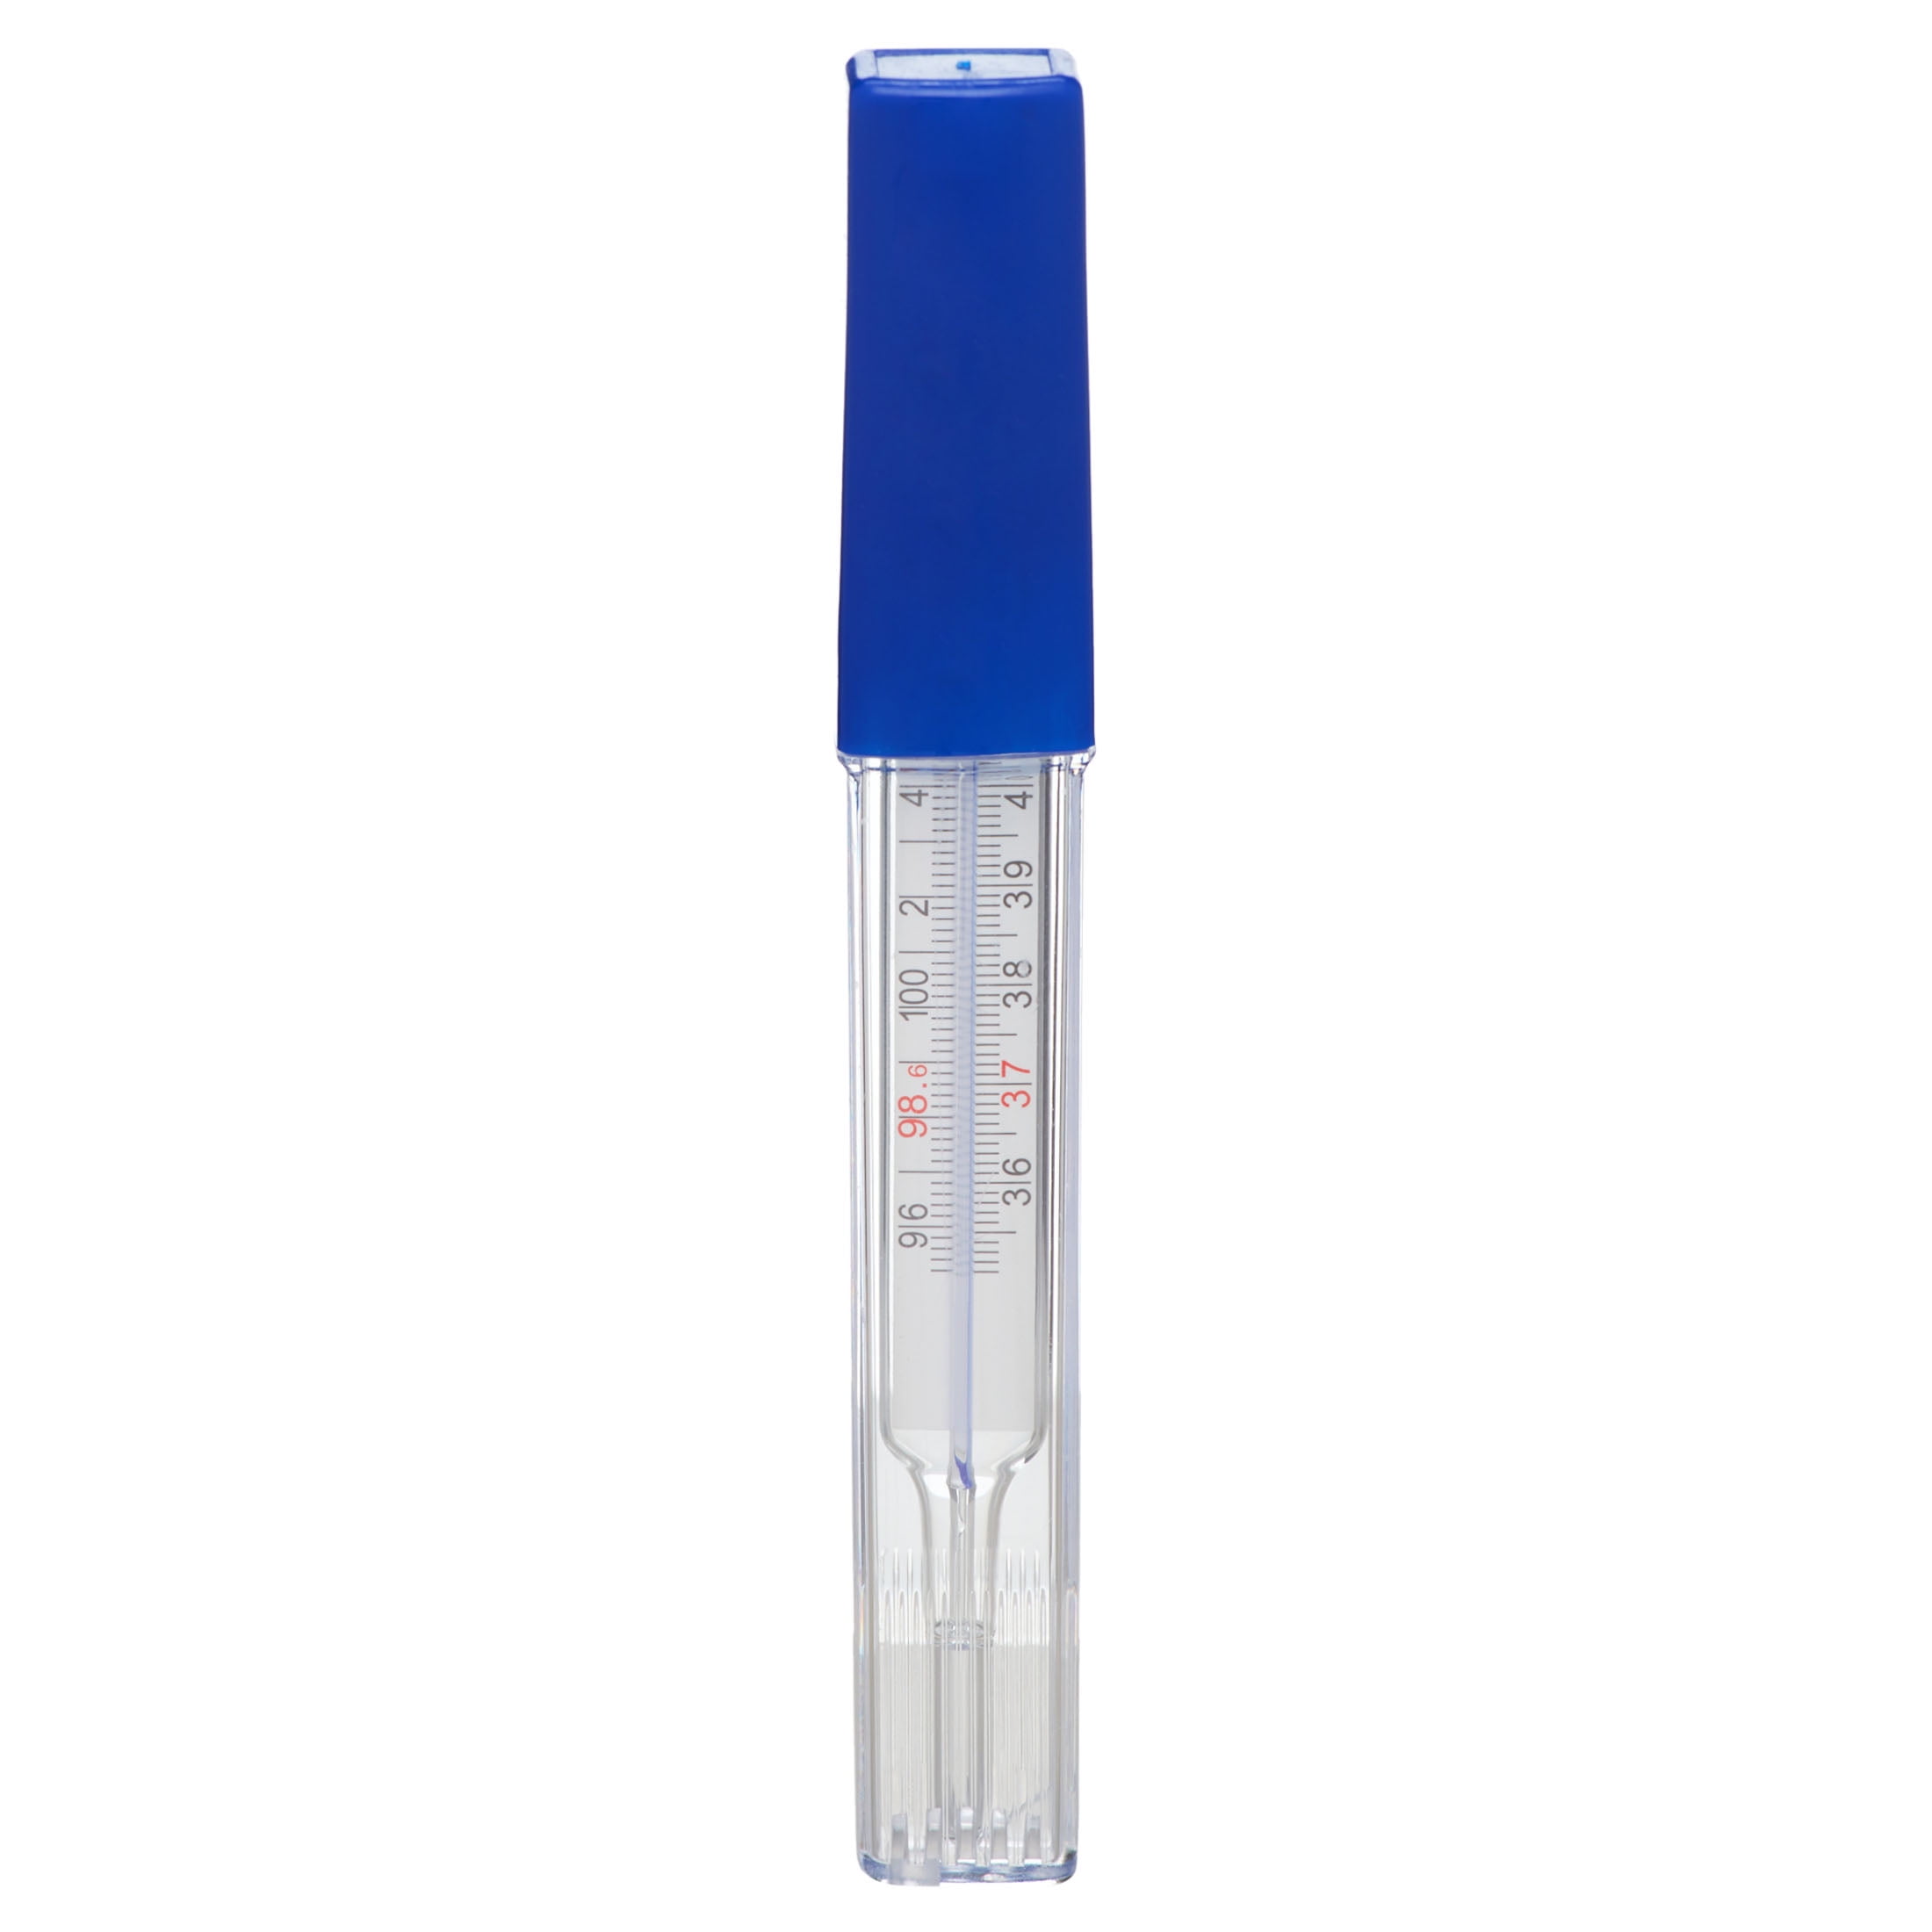 Dual Scale Geratherm Classic Rectal Clinical Glass Mercury-Free Thermometer 